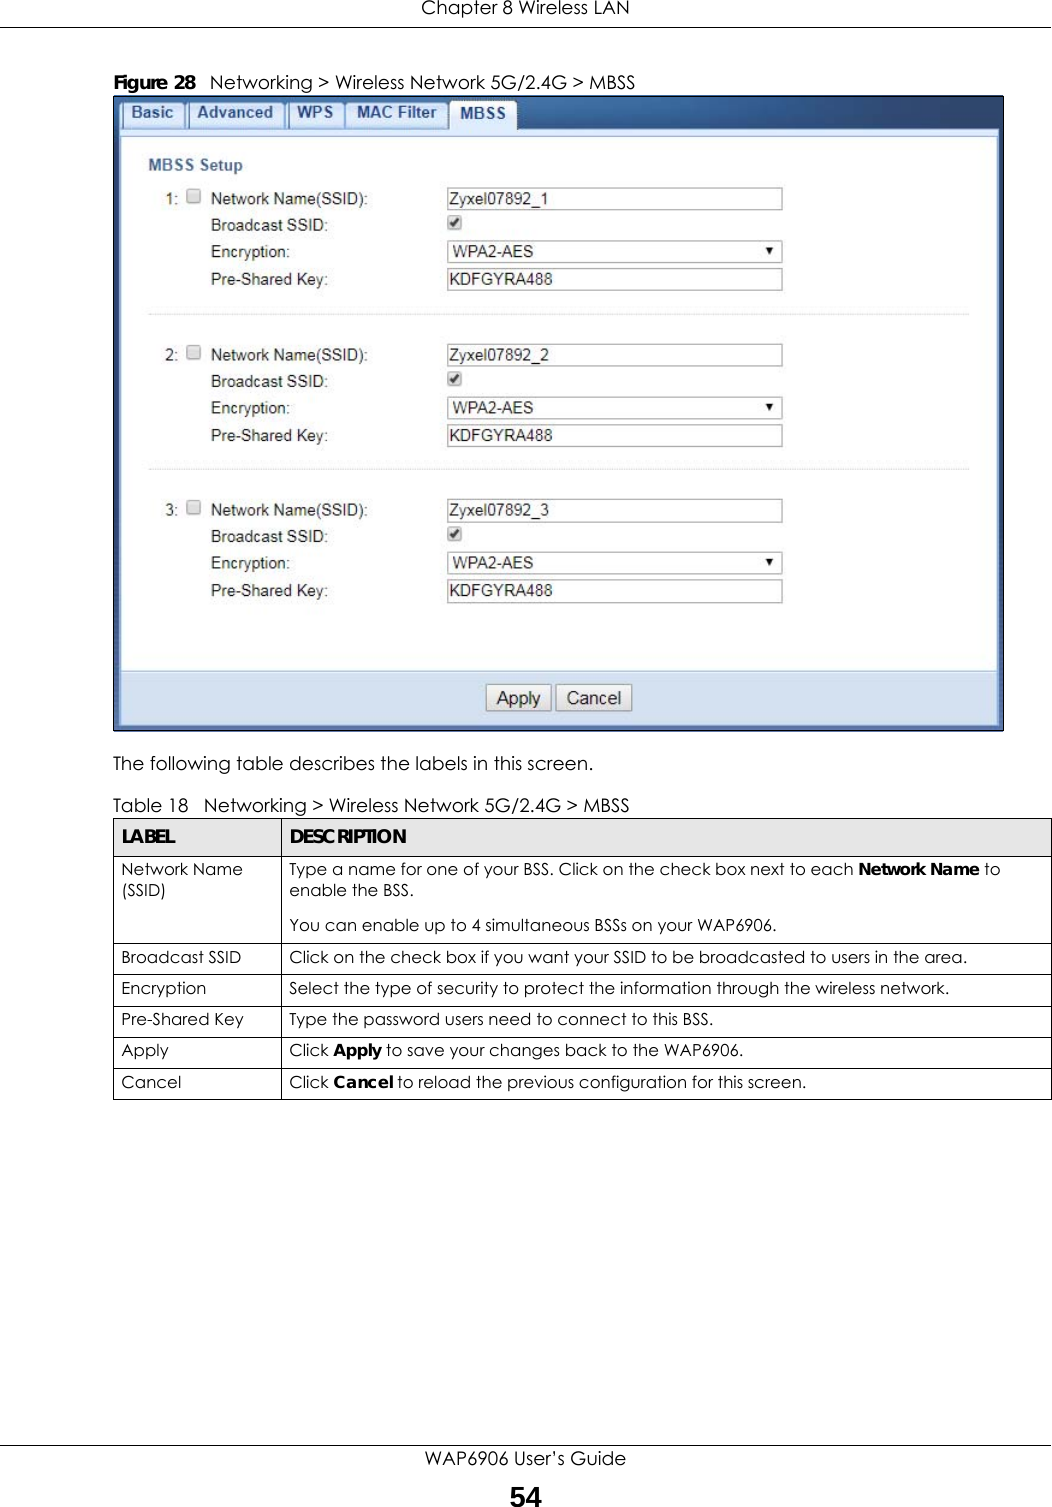 Chapter 8 Wireless LANWAP6906 User’s Guide54Figure 28   Networking &gt; Wireless Network 5G/2.4G &gt; MBSS The following table describes the labels in this screen.Table 18   Networking &gt; Wireless Network 5G/2.4G &gt; MBSSLABEL DESCRIPTIONNetwork Name (SSID)Type a name for one of your BSS. Click on the check box next to each Network Name to enable the BSS.You can enable up to 4 simultaneous BSSs on your WAP6906.Broadcast SSID Click on the check box if you want your SSID to be broadcasted to users in the area.Encryption Select the type of security to protect the information through the wireless network.Pre-Shared Key Type the password users need to connect to this BSS.Apply Click Apply to save your changes back to the WAP6906.Cancel Click Cancel to reload the previous configuration for this screen.